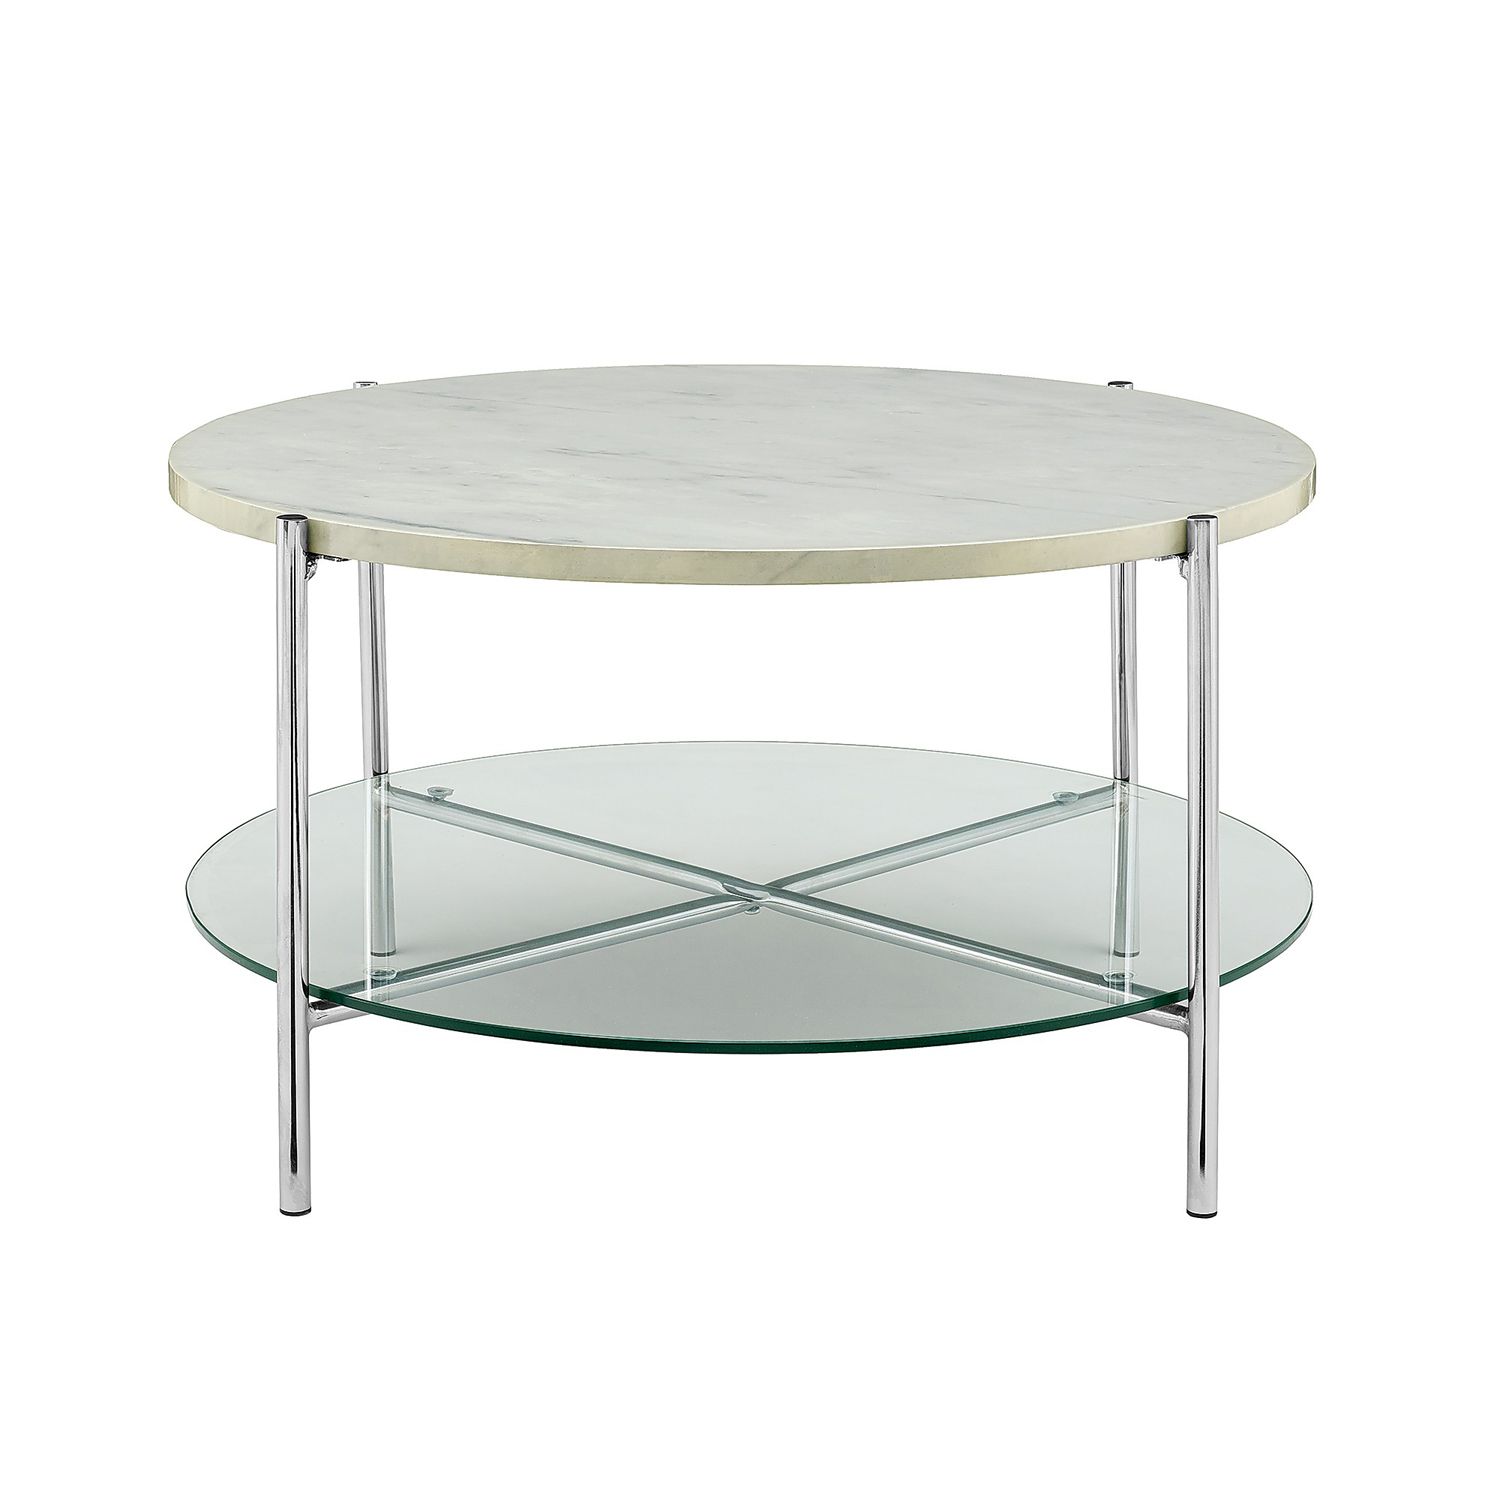 Faux Marble Round Coffee Table – Pier1 With Modern Round Faux Marble Coffee Tables (Gallery 17 of 20)